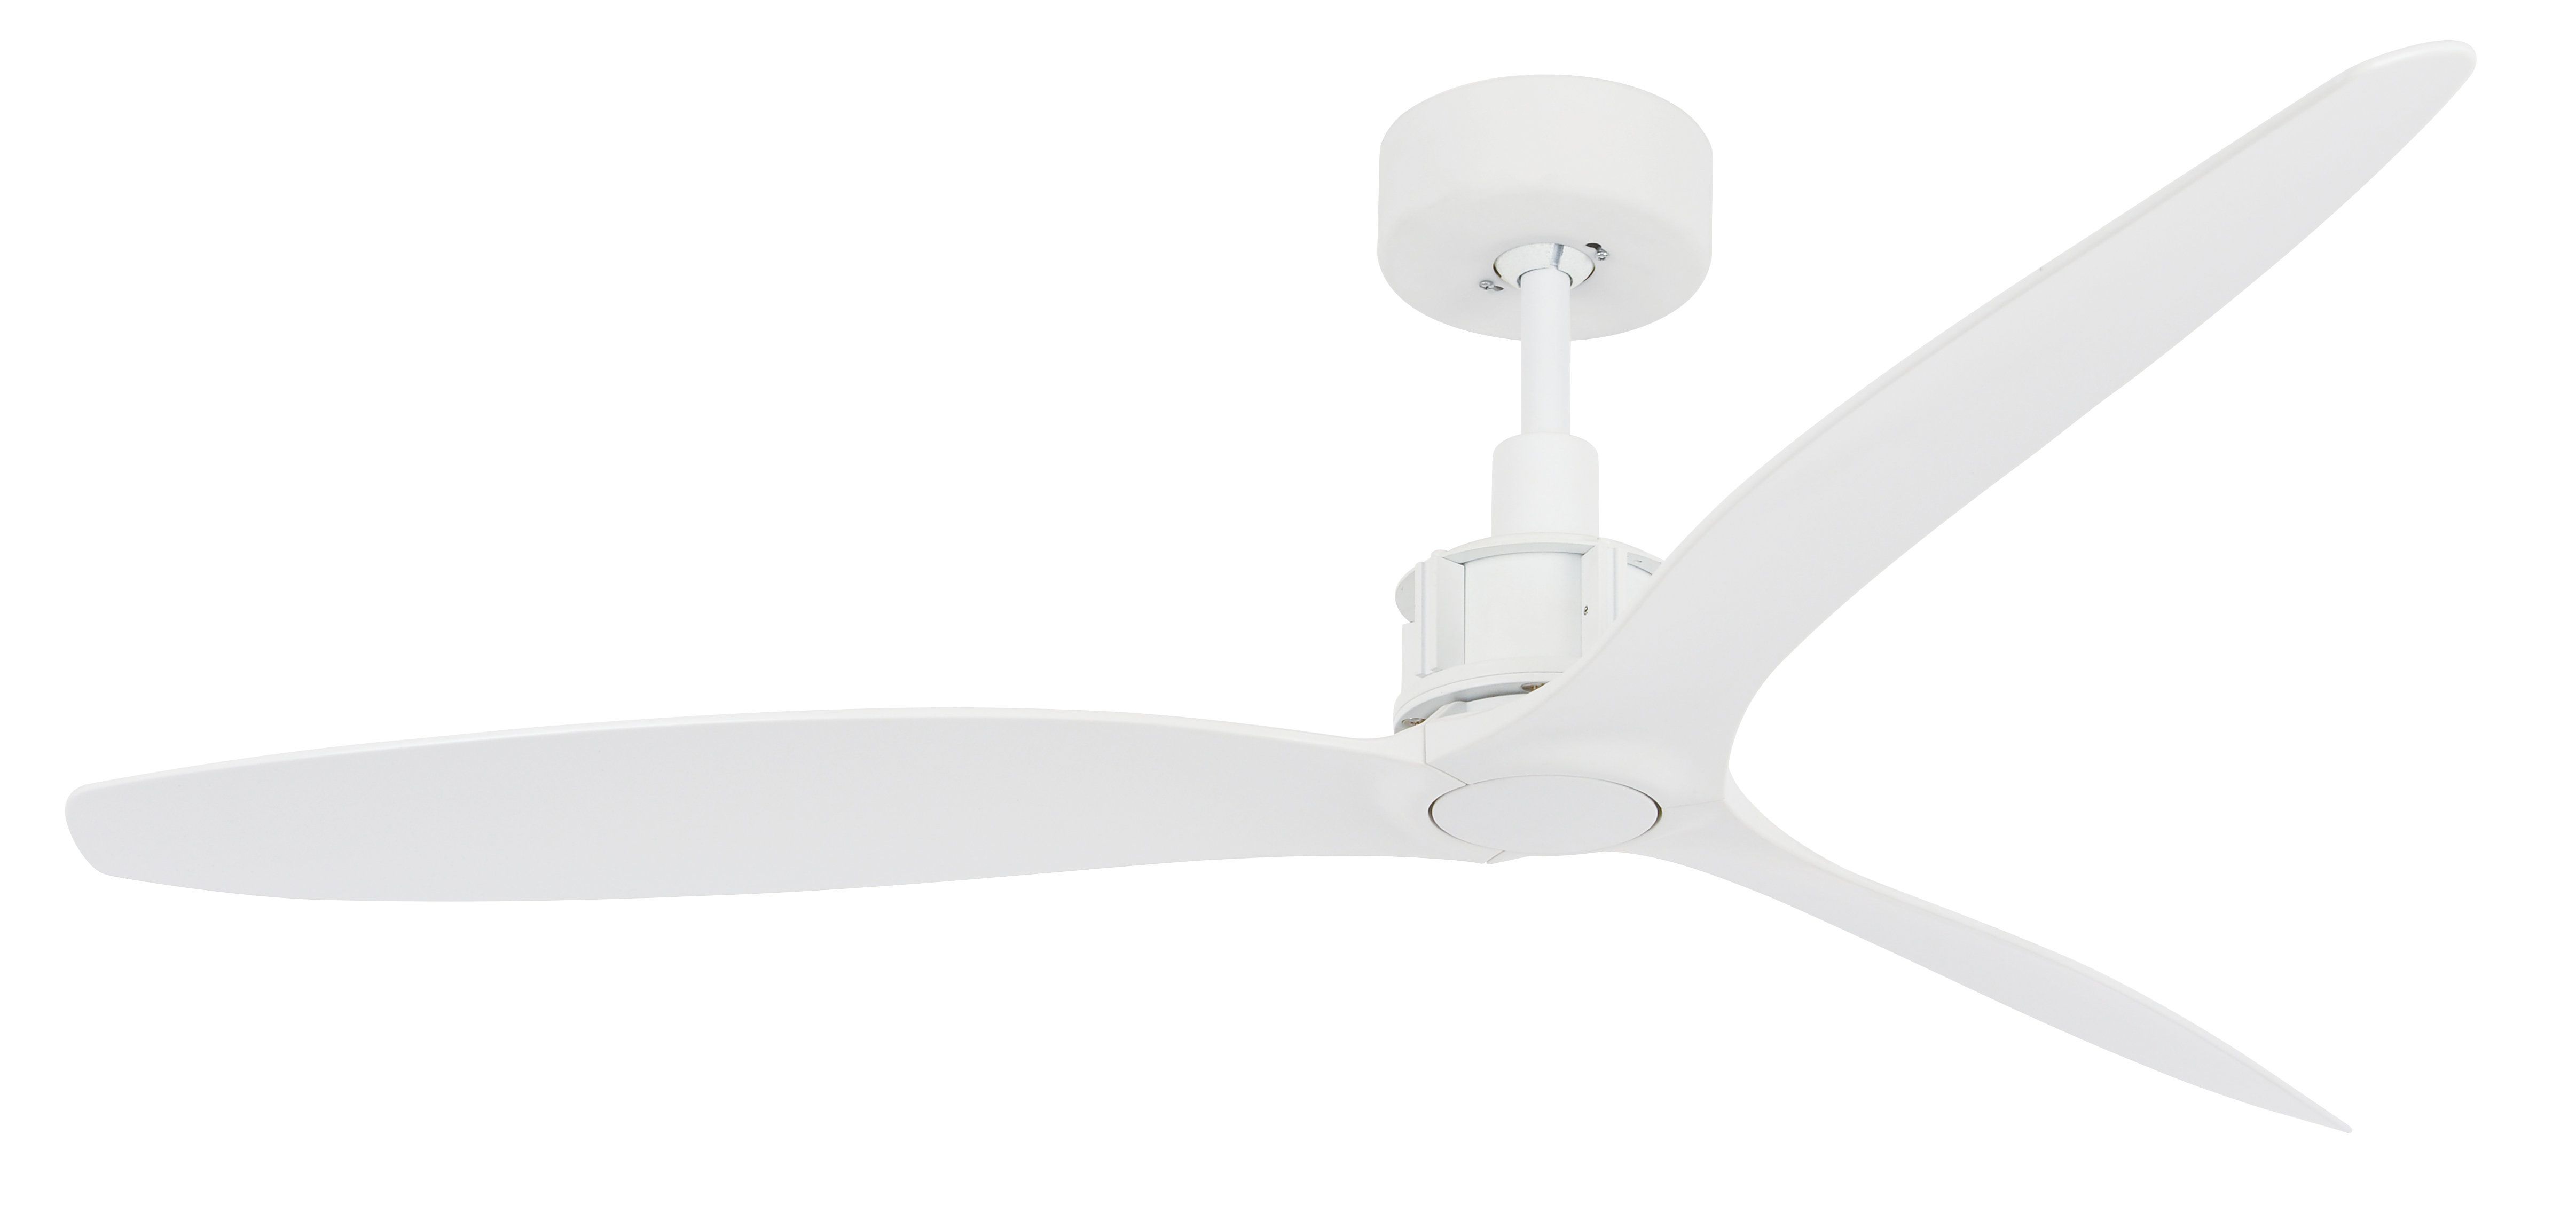 Theron 52" Catoe 3 Blade Ceiling Fan With Remote Throughout Well Liked Theron Catoe 3 Blade Ceiling Fans (View 3 of 20)